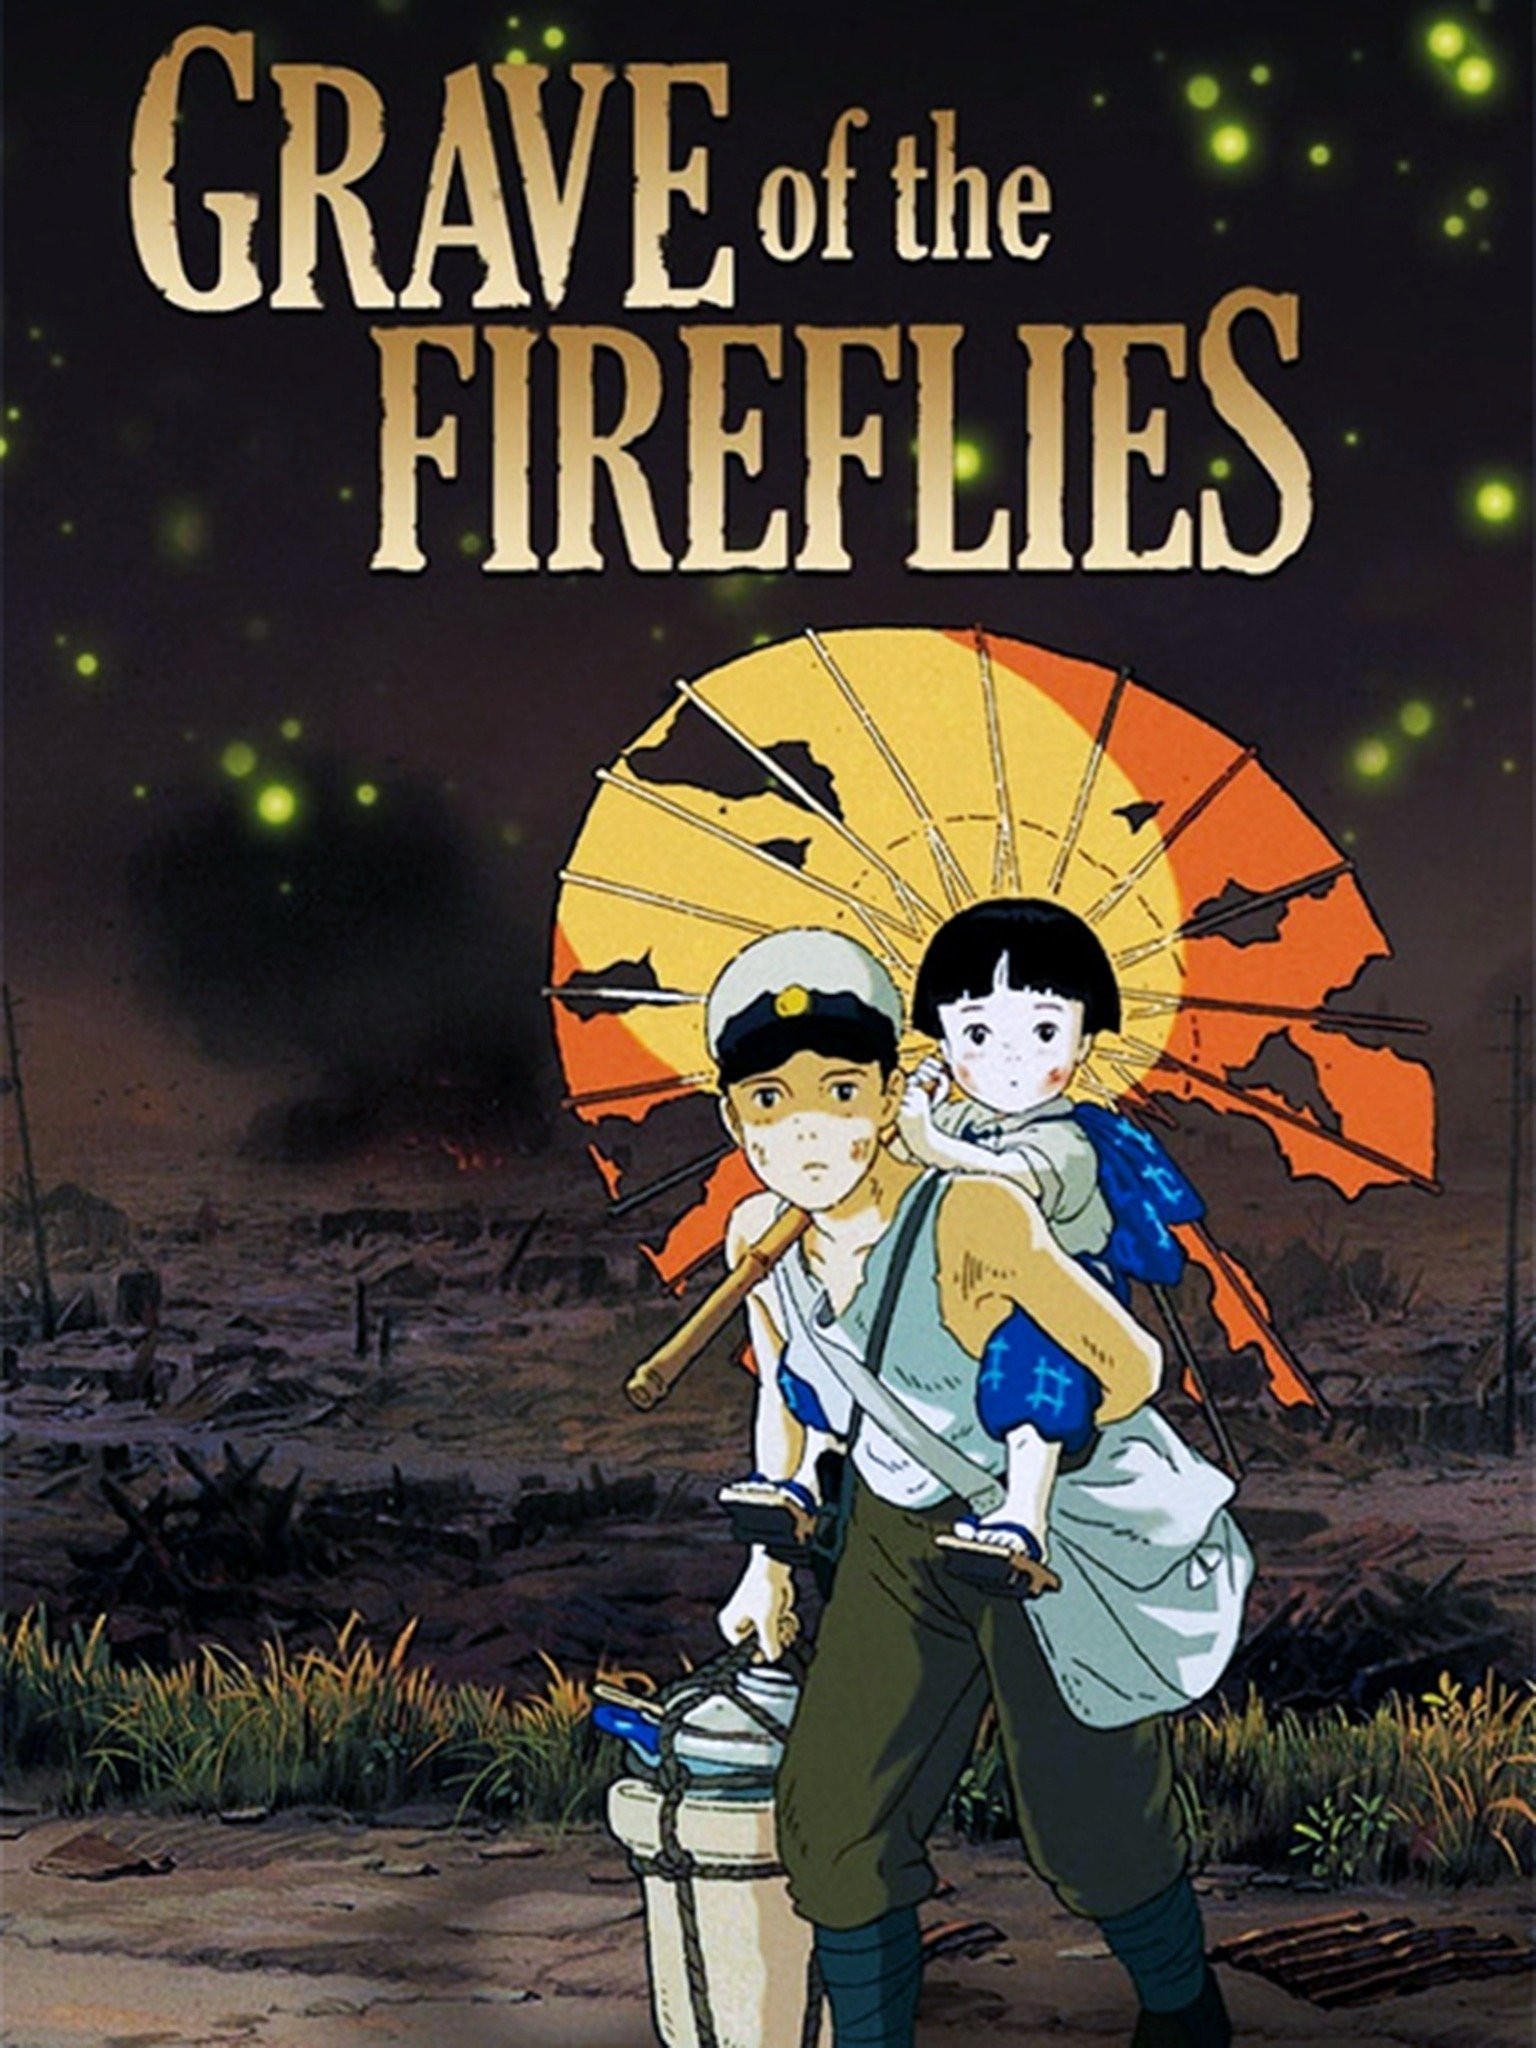 The True Story Behind Grave of the Fireflies